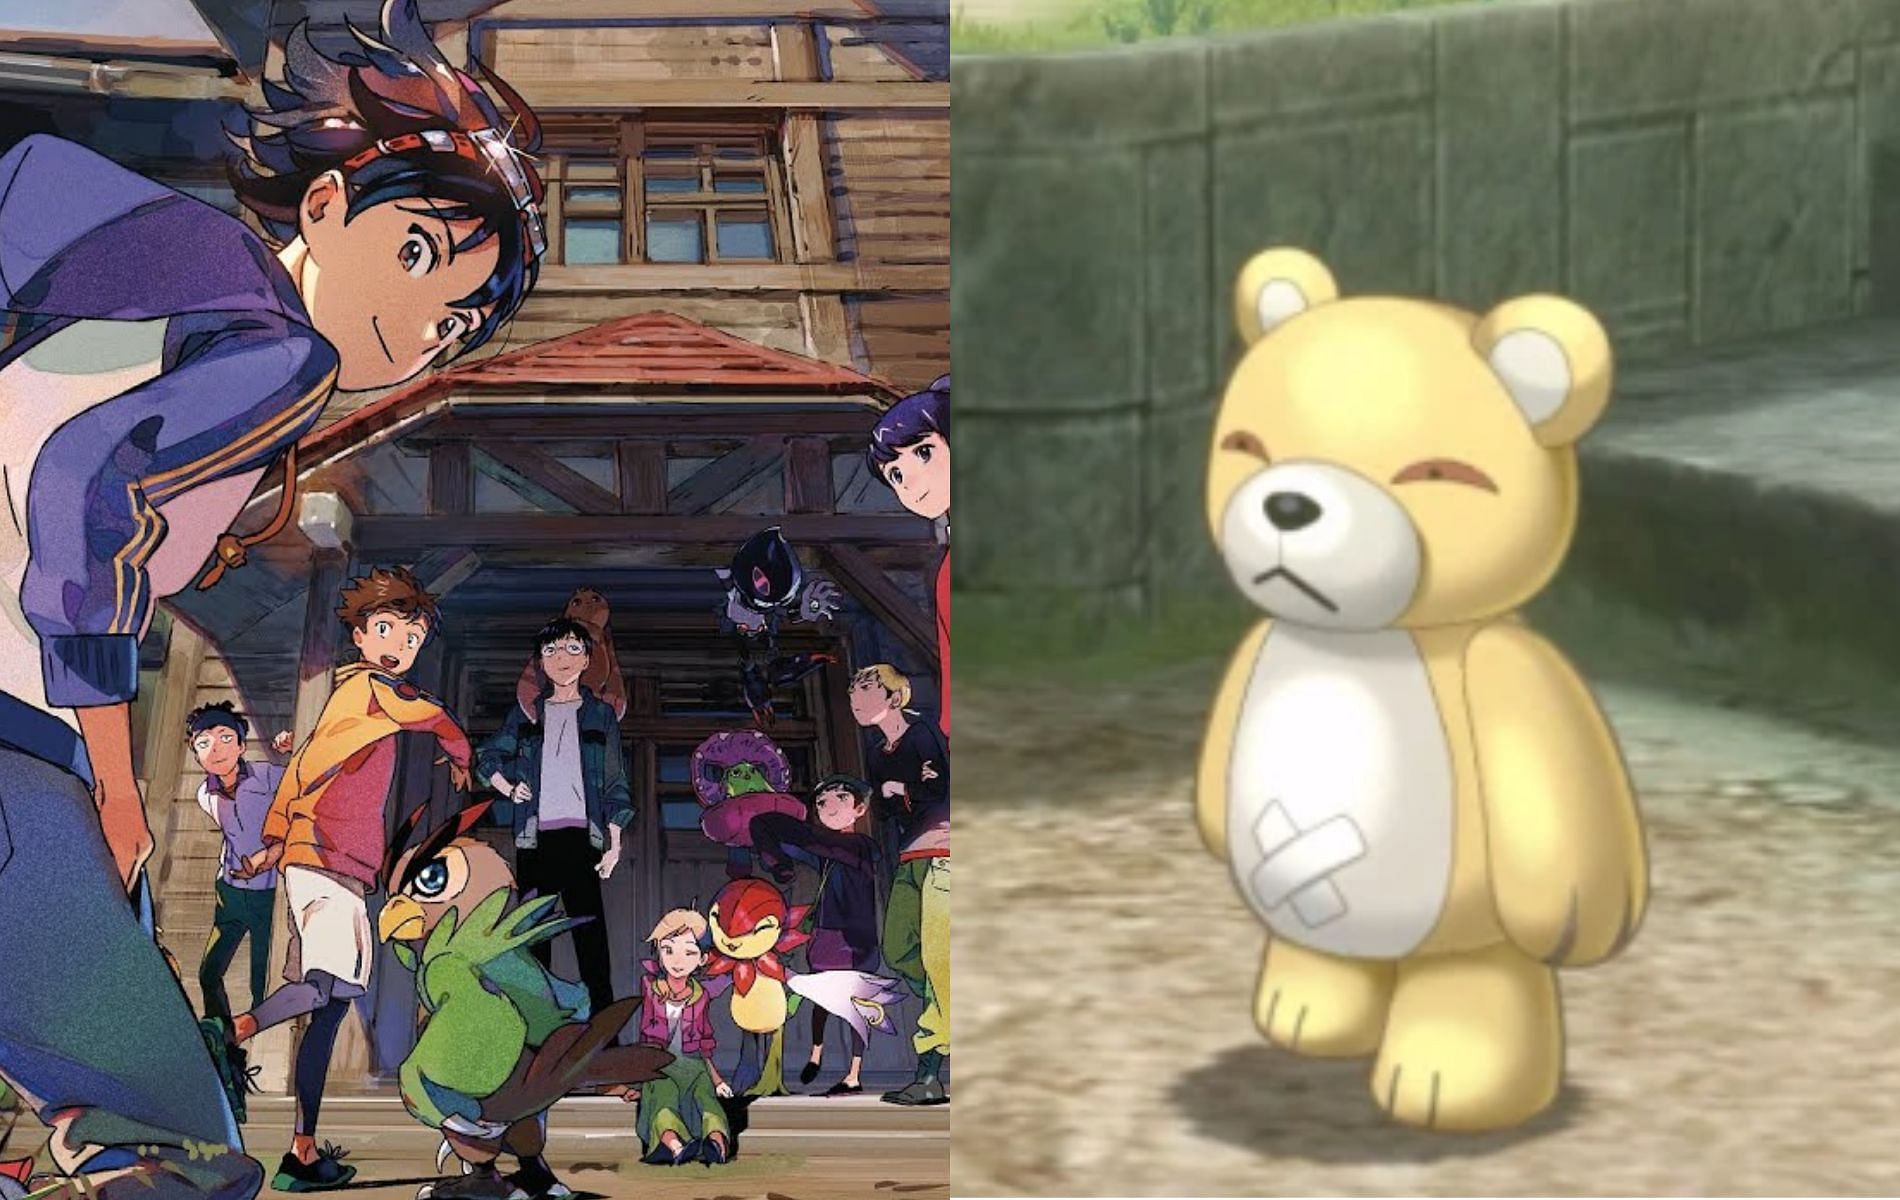 Meet this unnerving teddy bear Digimon in Digimon Survive (Images via Bandai Namco)